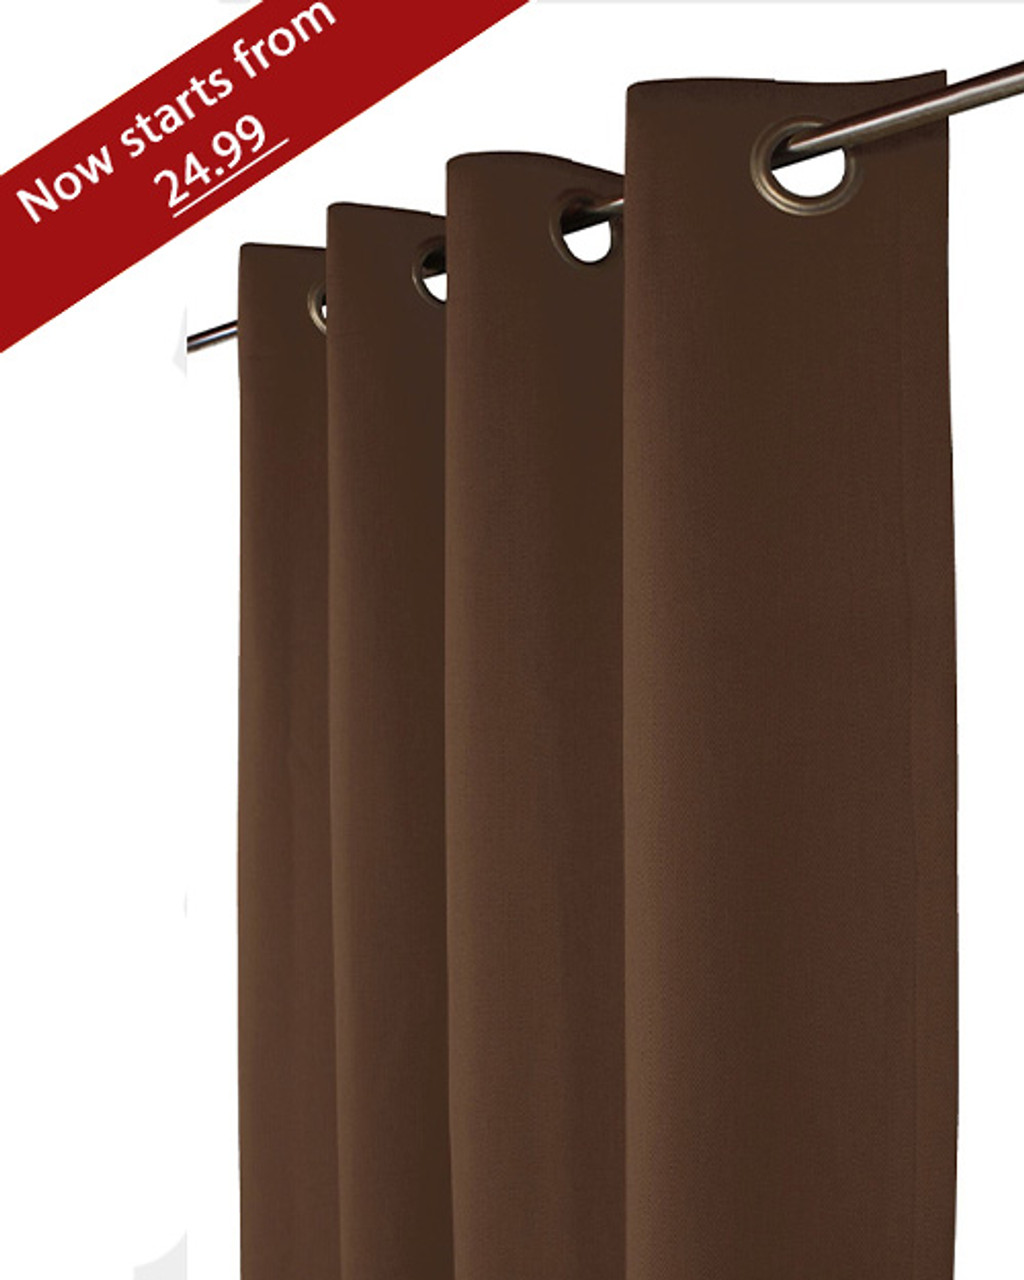 Light out curtain Grommet Top plain Design-Brown-Polyester- 56x96 inches-16